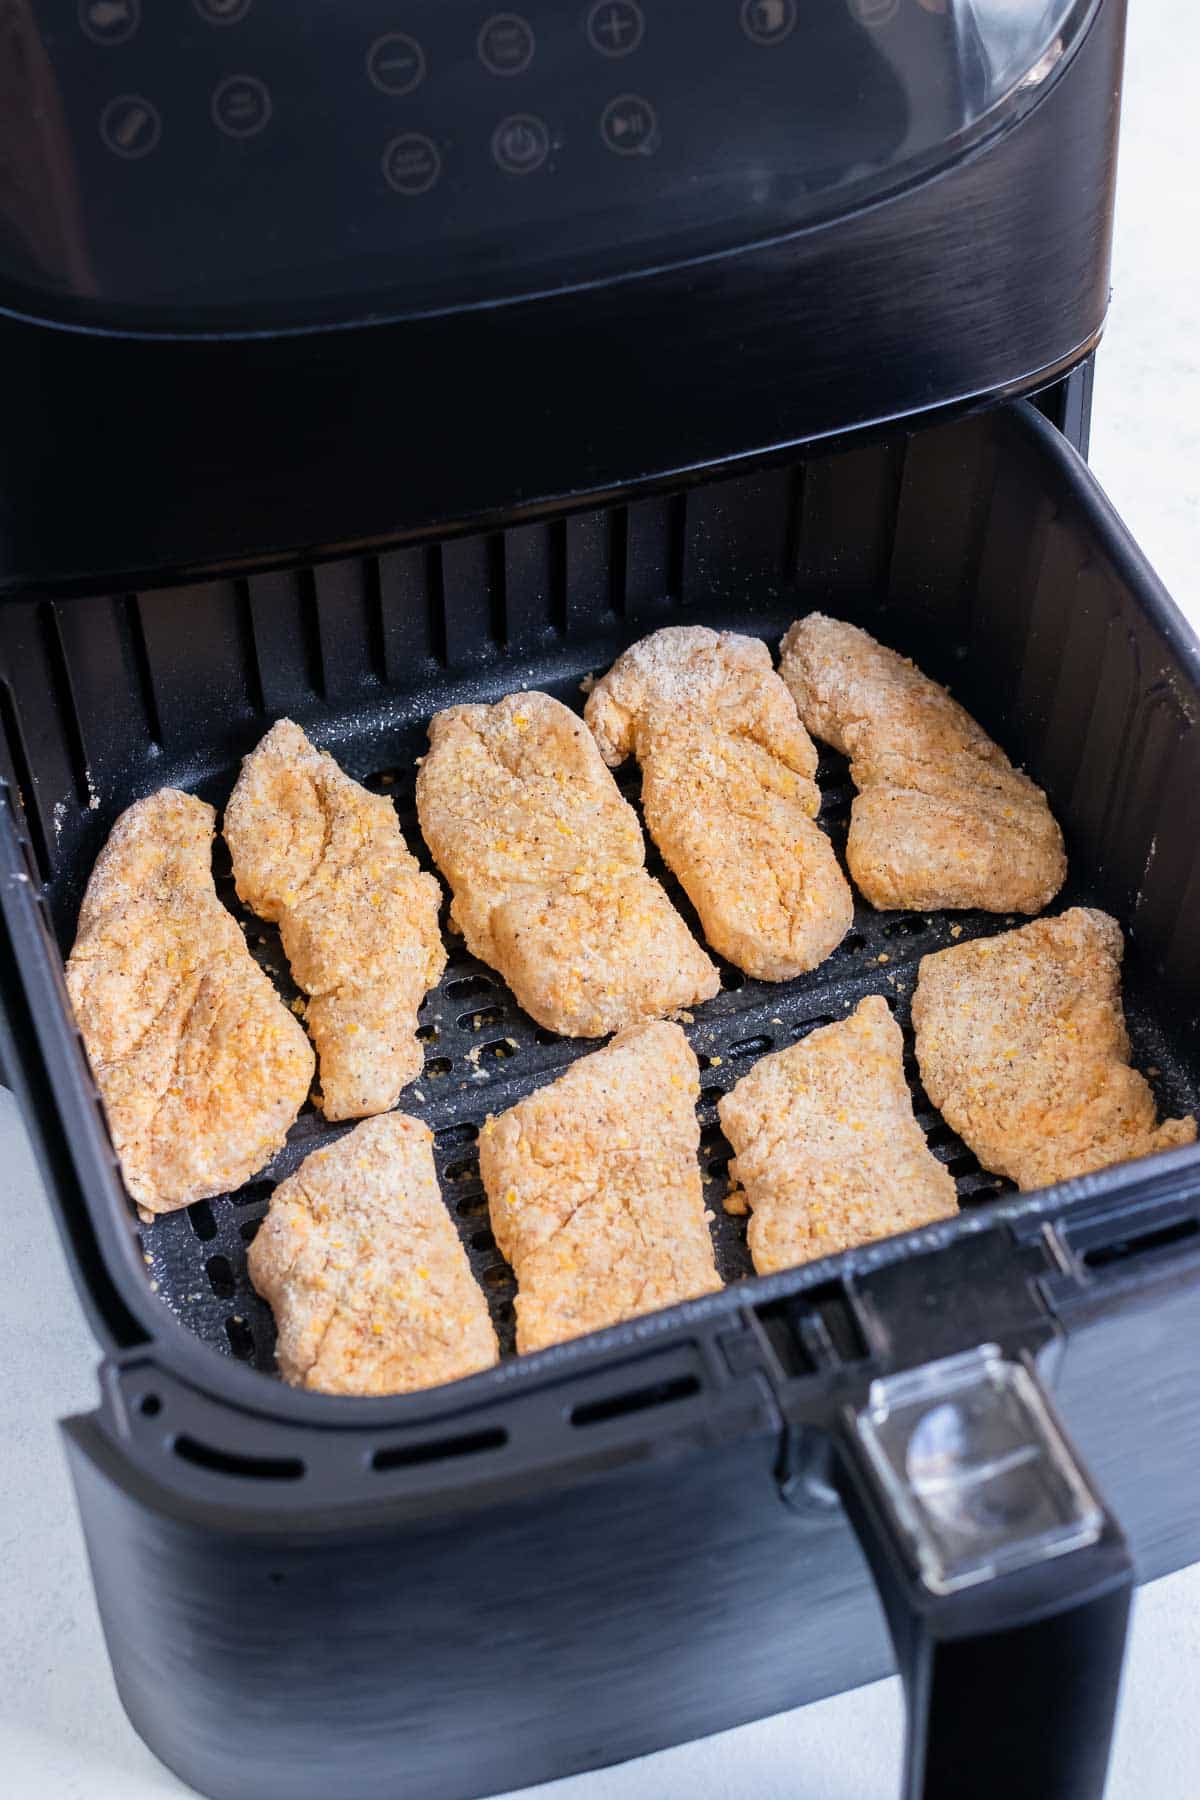 The coated fish is placed in the air fryer.